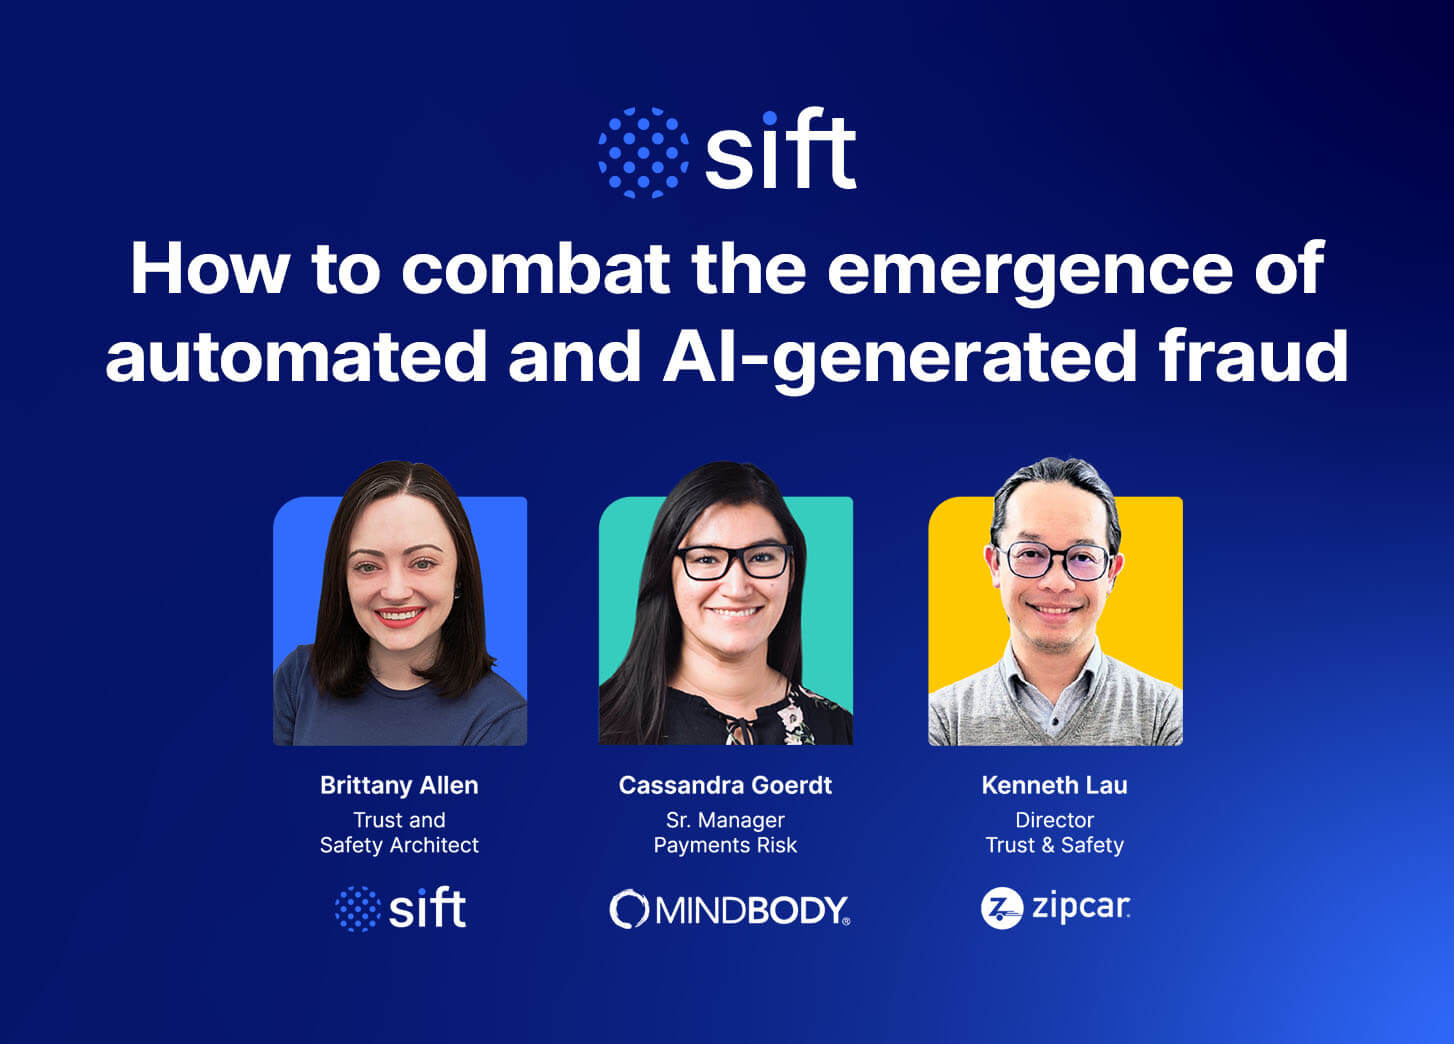 How to combat the emergence of automated and AI-generated fraud – Source: securityboulevard.com